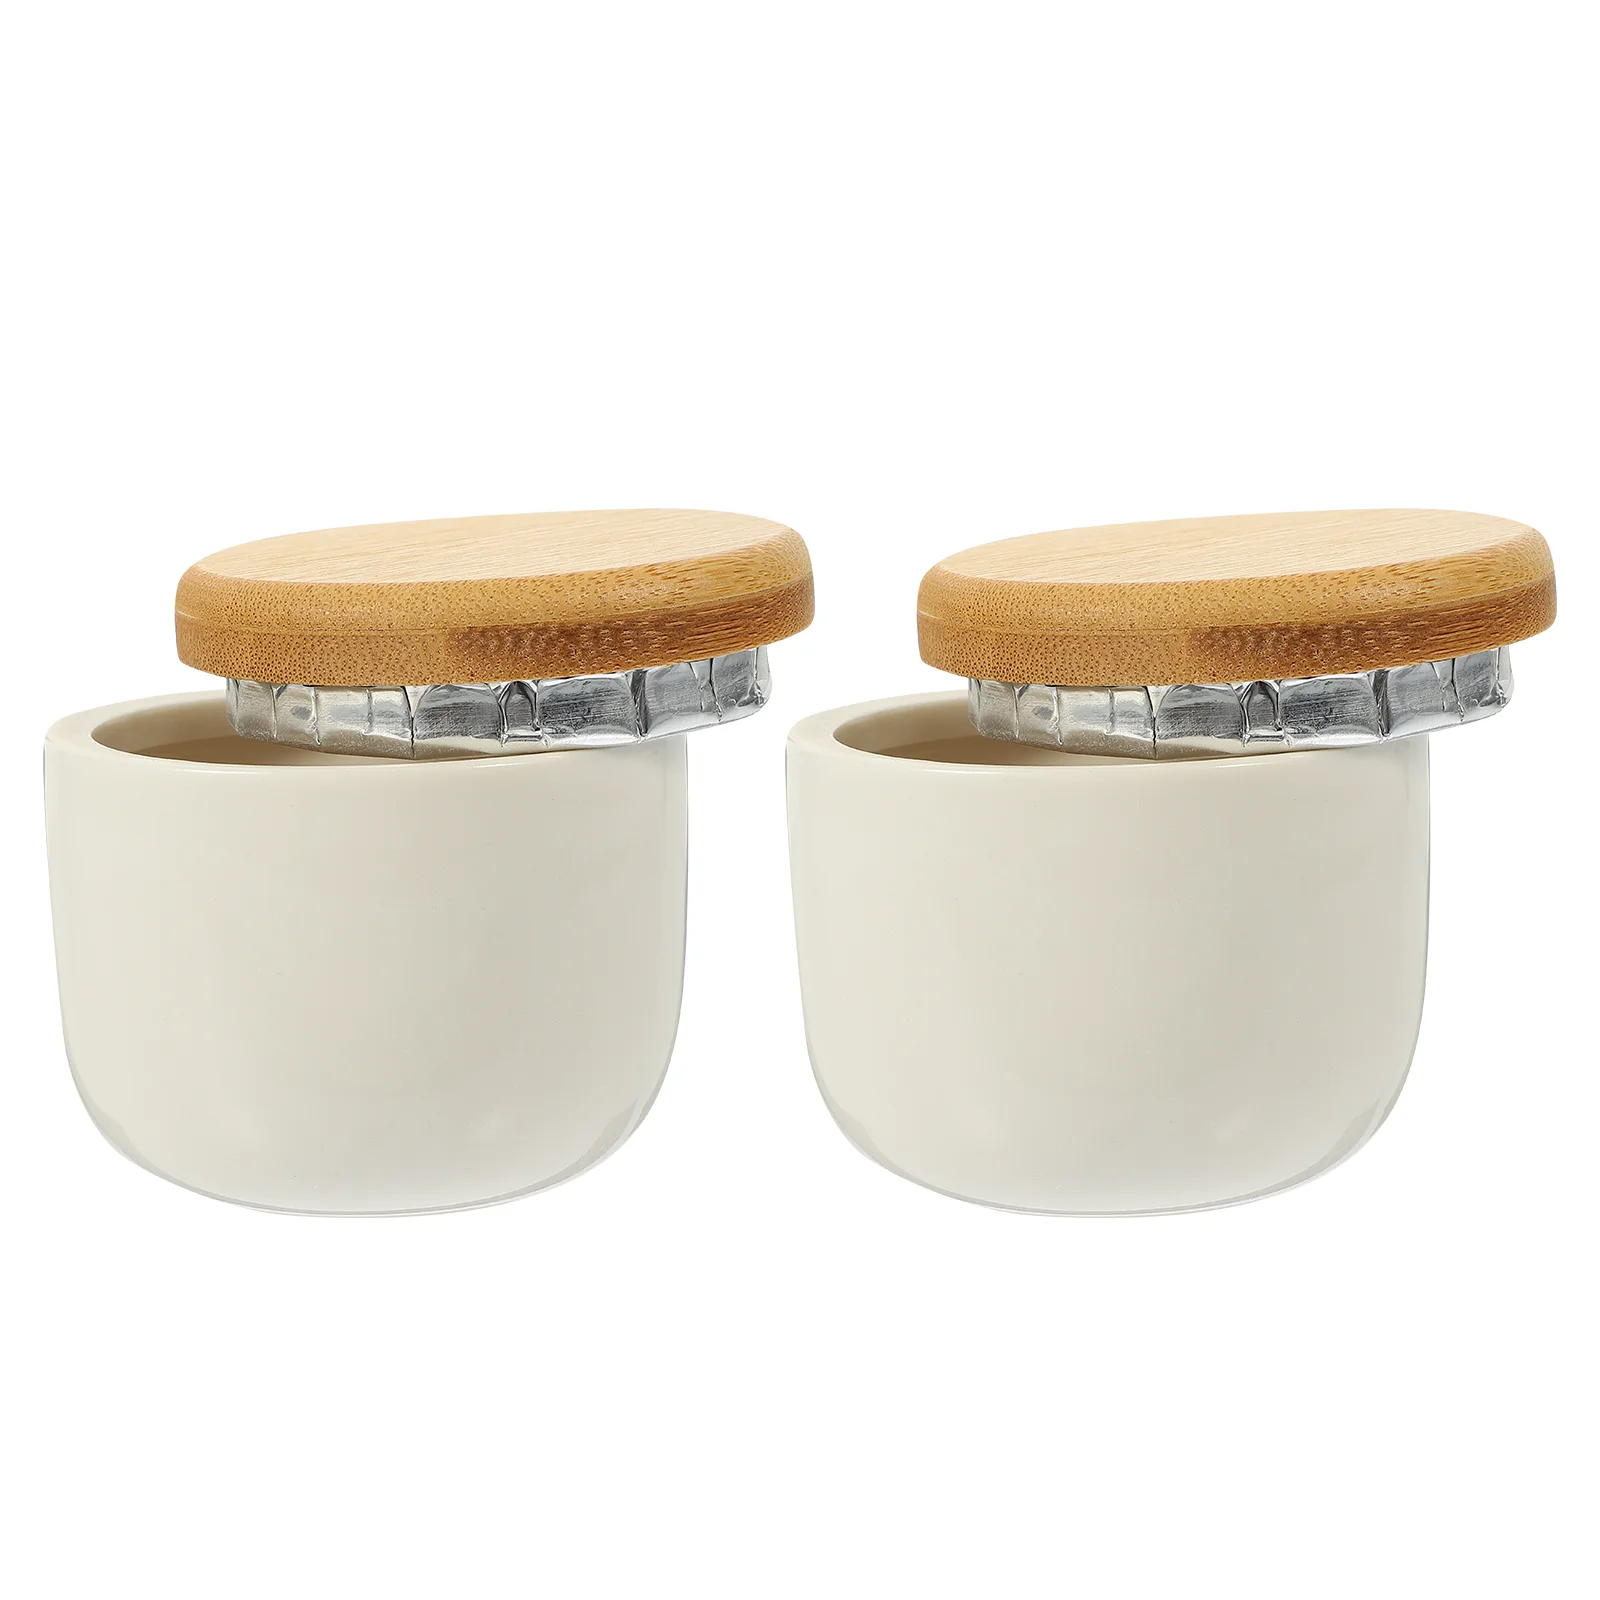 

2 Pcs Bamboo Lid Ceramic Jar Coffee Beans Storage Sealing Tea Canister Container Leaf Holder Spice Containers Lids Bulk